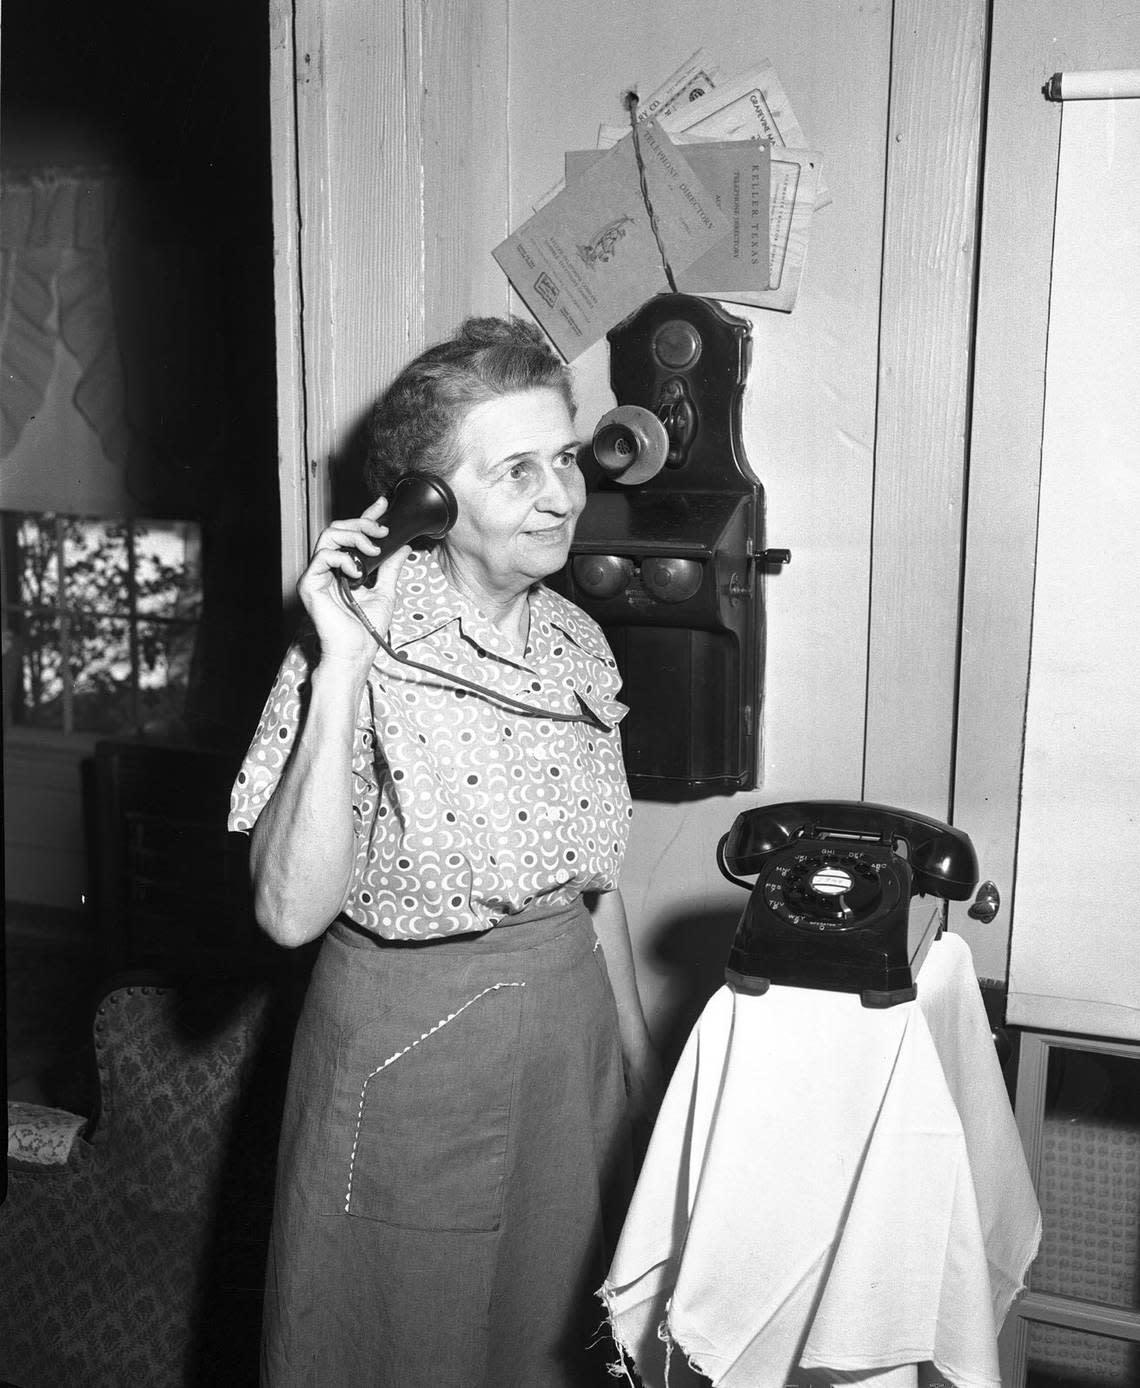 Aug. 5, 1954: Mrs. Mabel Scott of Keller makes a call on old-time magneto wall telephone. Fort Worth Star-Telegram archive/UT Arlington Special Collections